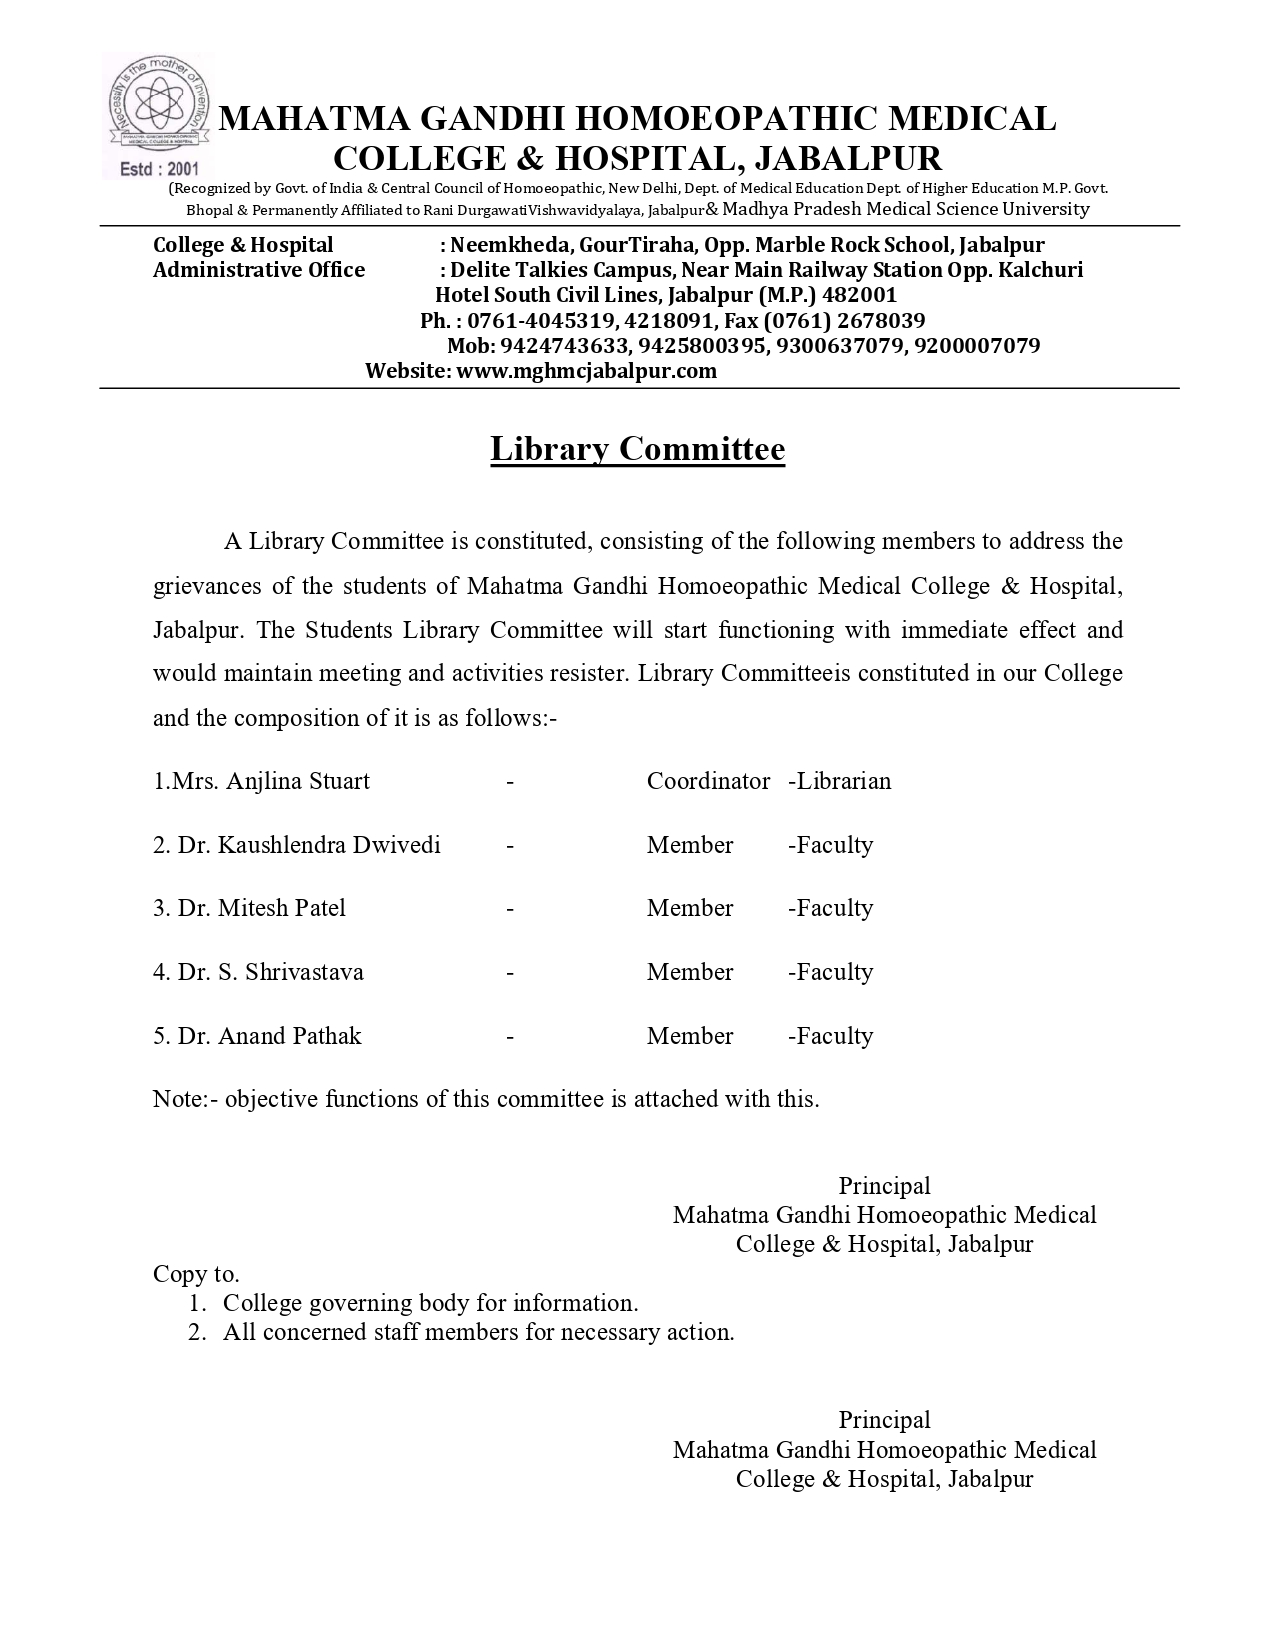 Mahatma Gandhi Homoeopathic Medical College & Hospital library Committee